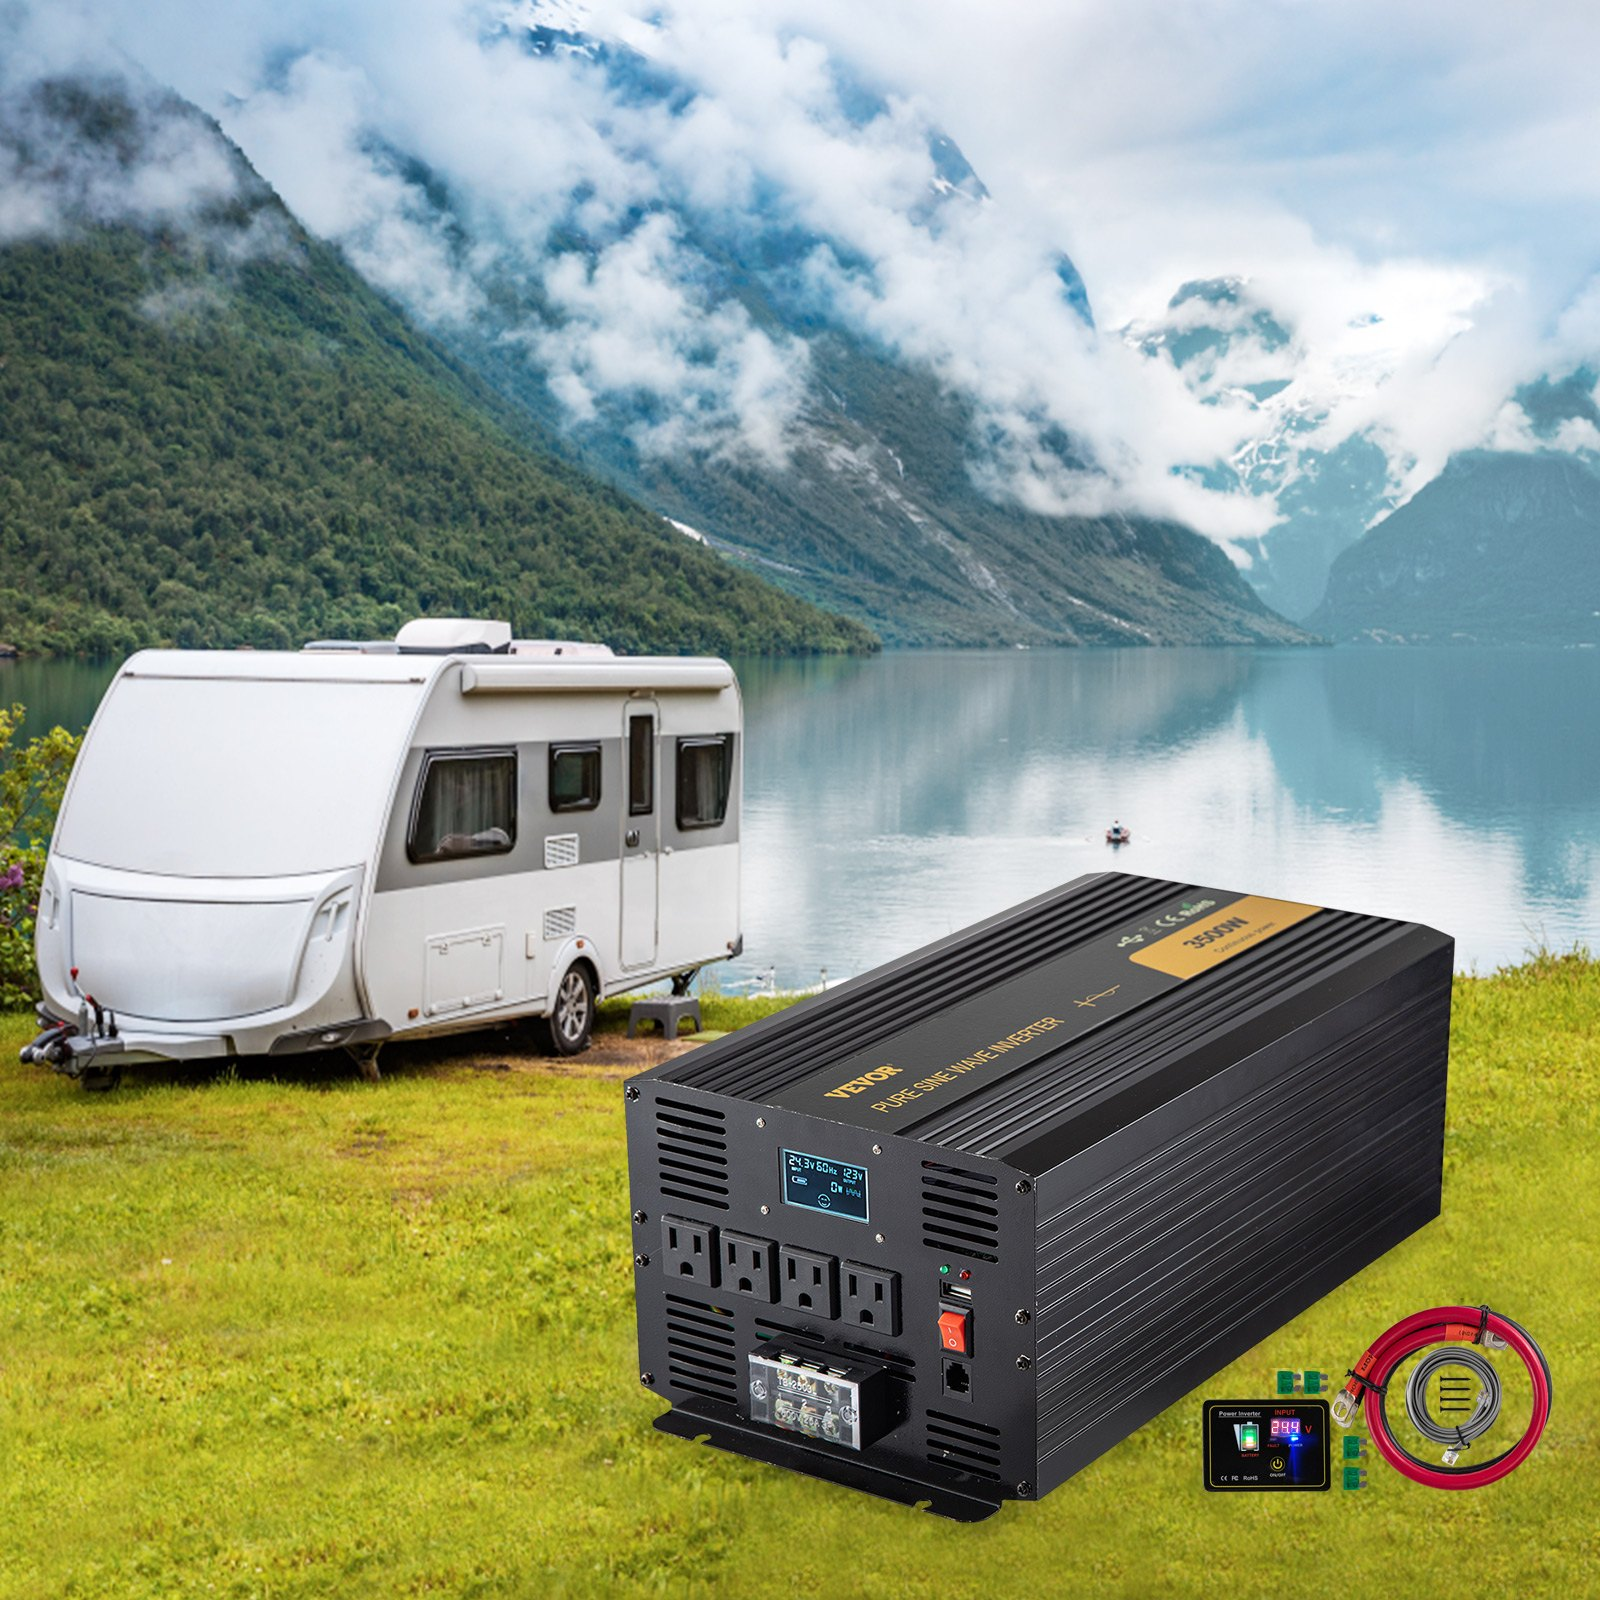 VEVOR Pure Sine Wave Inverter, 3500 Watt Power Inverter, DC 24V to AC 120V Car Inverter, with USB Port, LCD Display, and Remote Controller Power Converter, for RV Truck Car Solar System Travel Camping, Goodies N Stuff